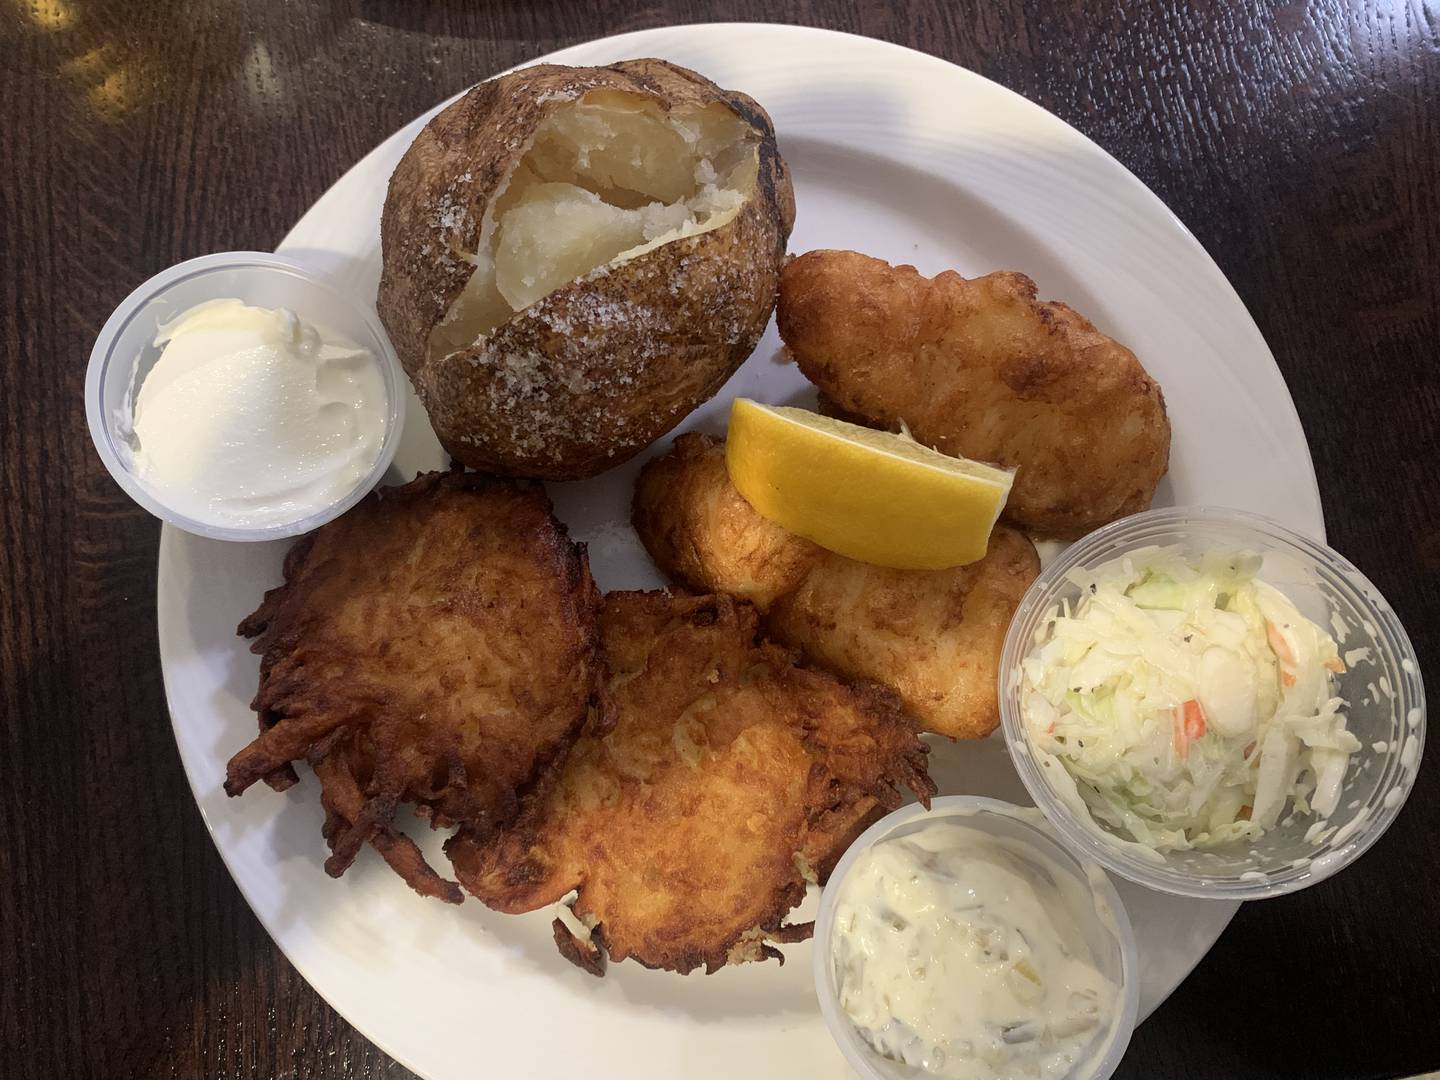 There are two options for the fish fry on the menu at VFW Post 4600, beer battered or baked hand-cut cod with coleslaw and a choice of potato (baked, potato pancakes, fries or tater tots). A two-piece meal costs $12; $15 for four pieces.